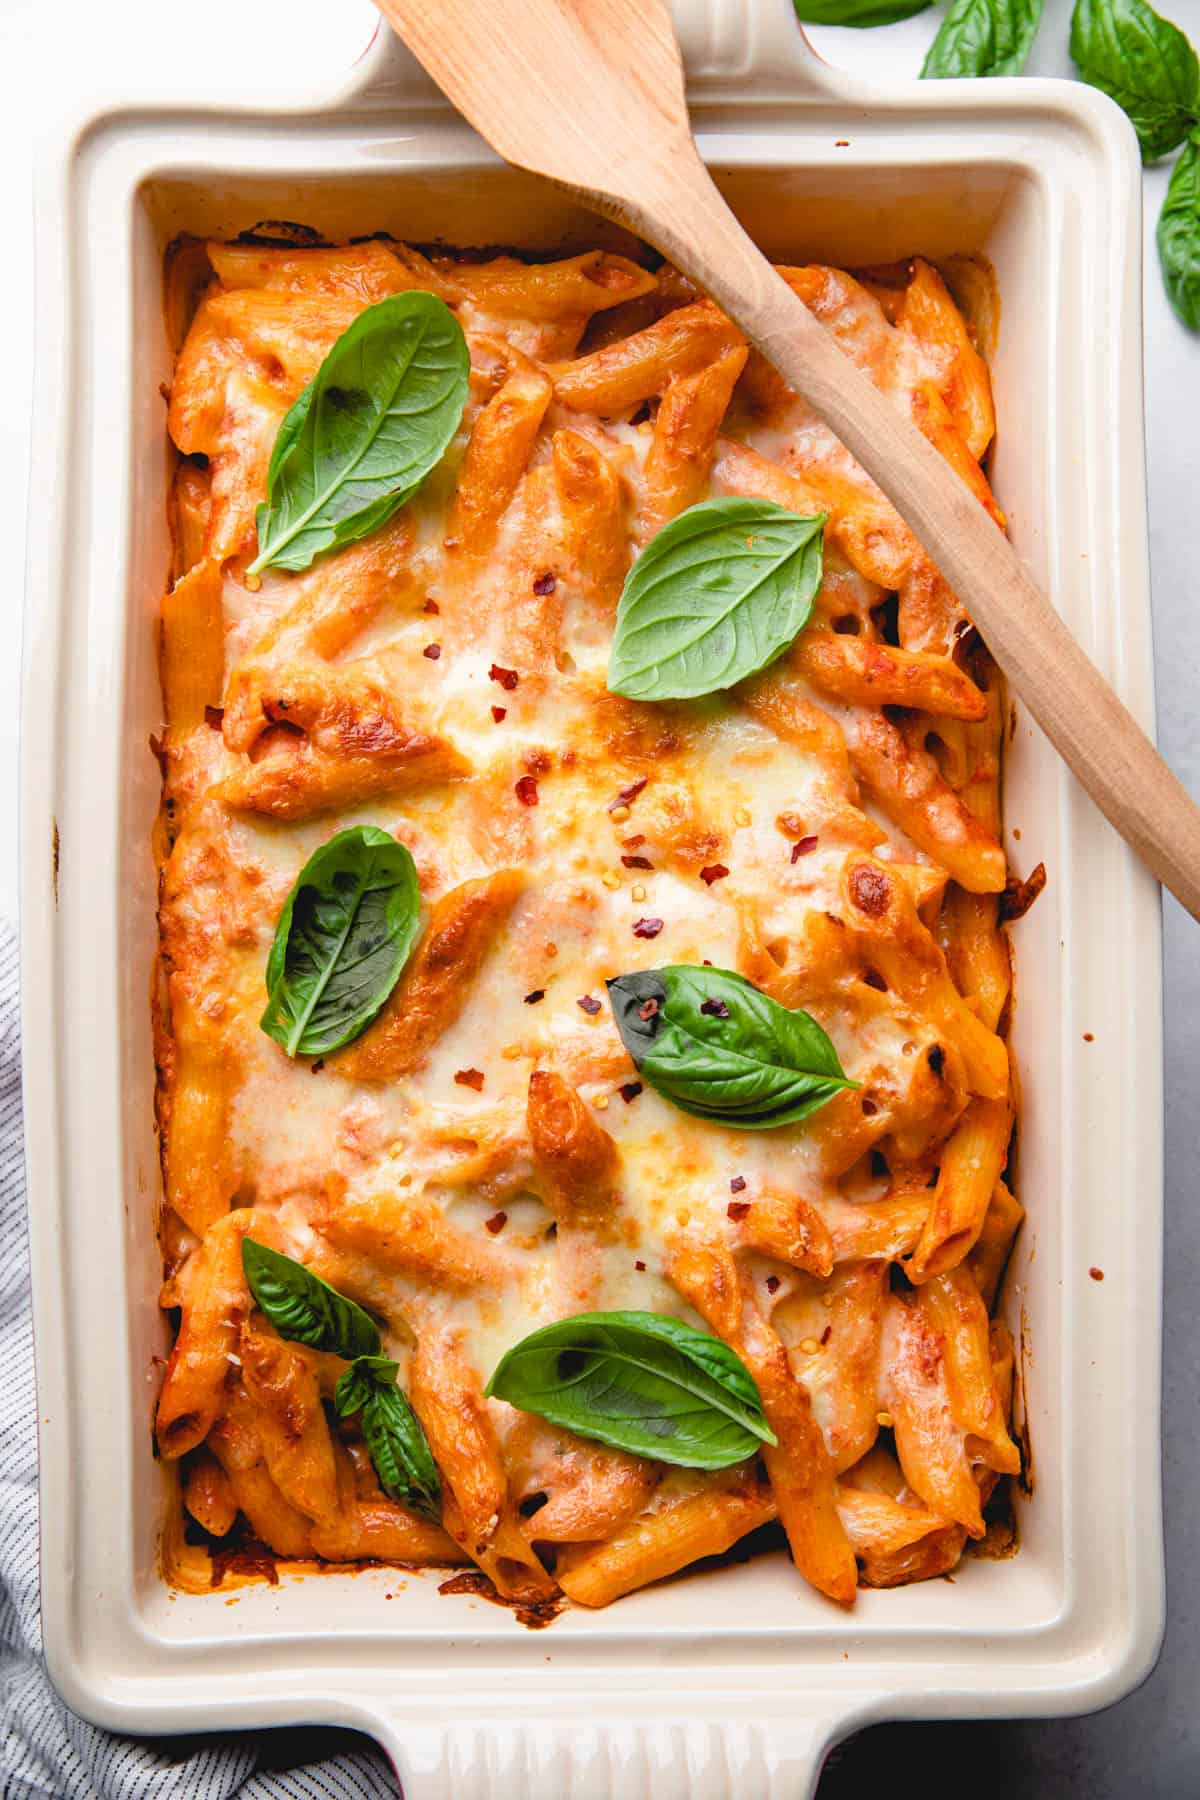 Pasta in a creamy tomato sauce, topped with melted cheese.